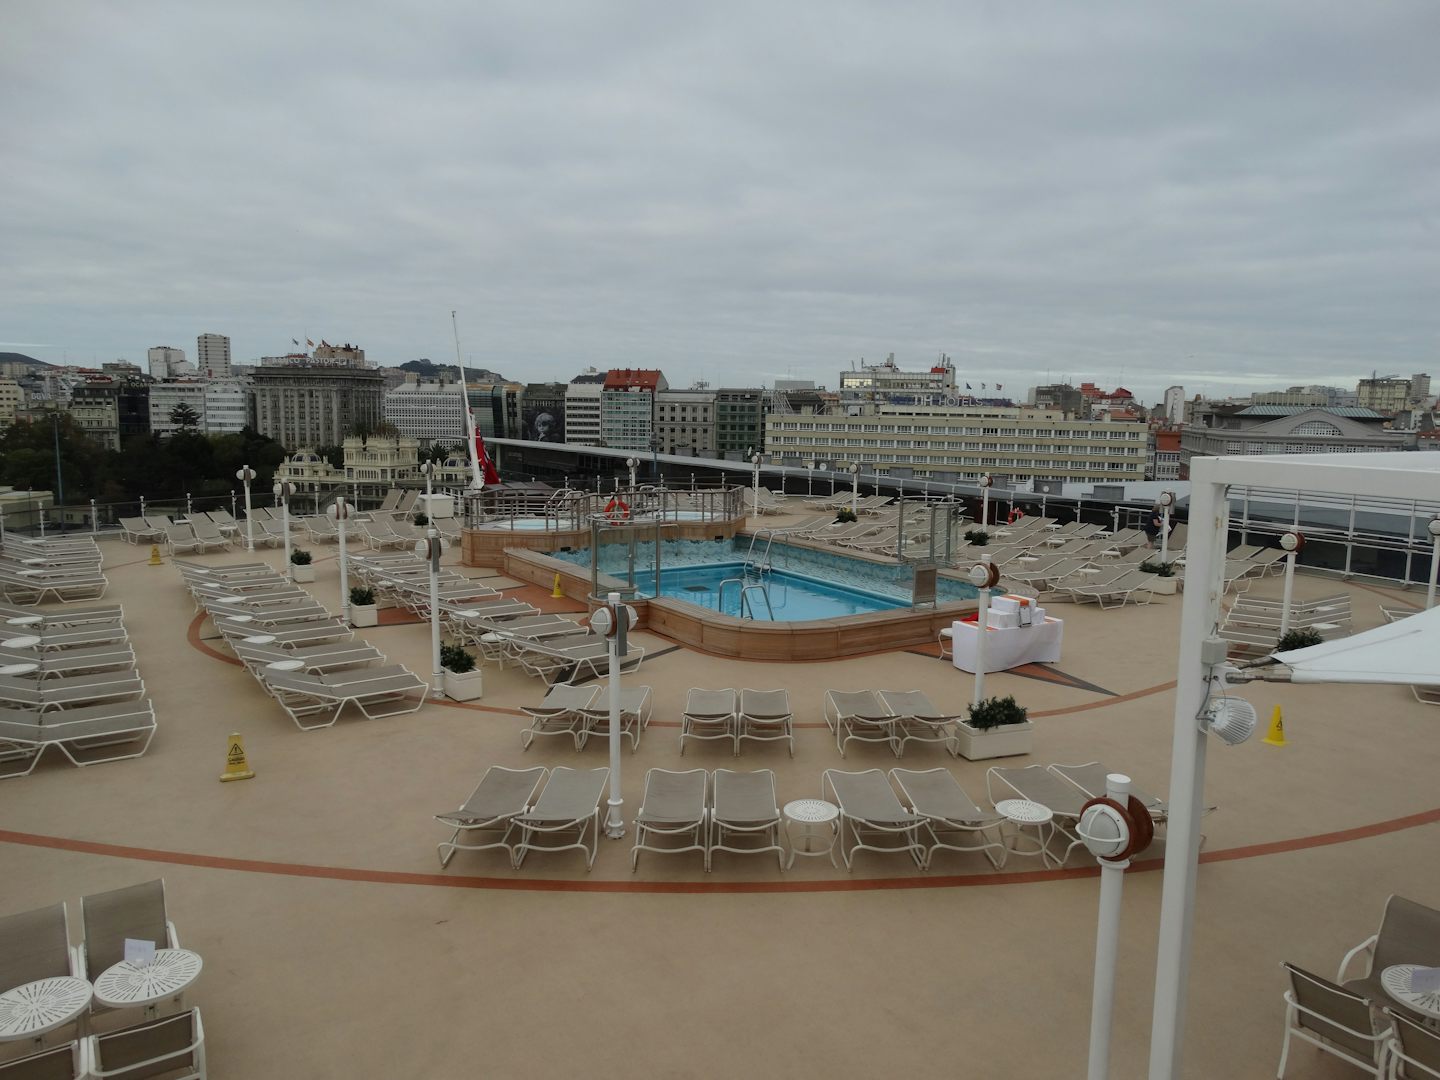 Pool area at rear of ship